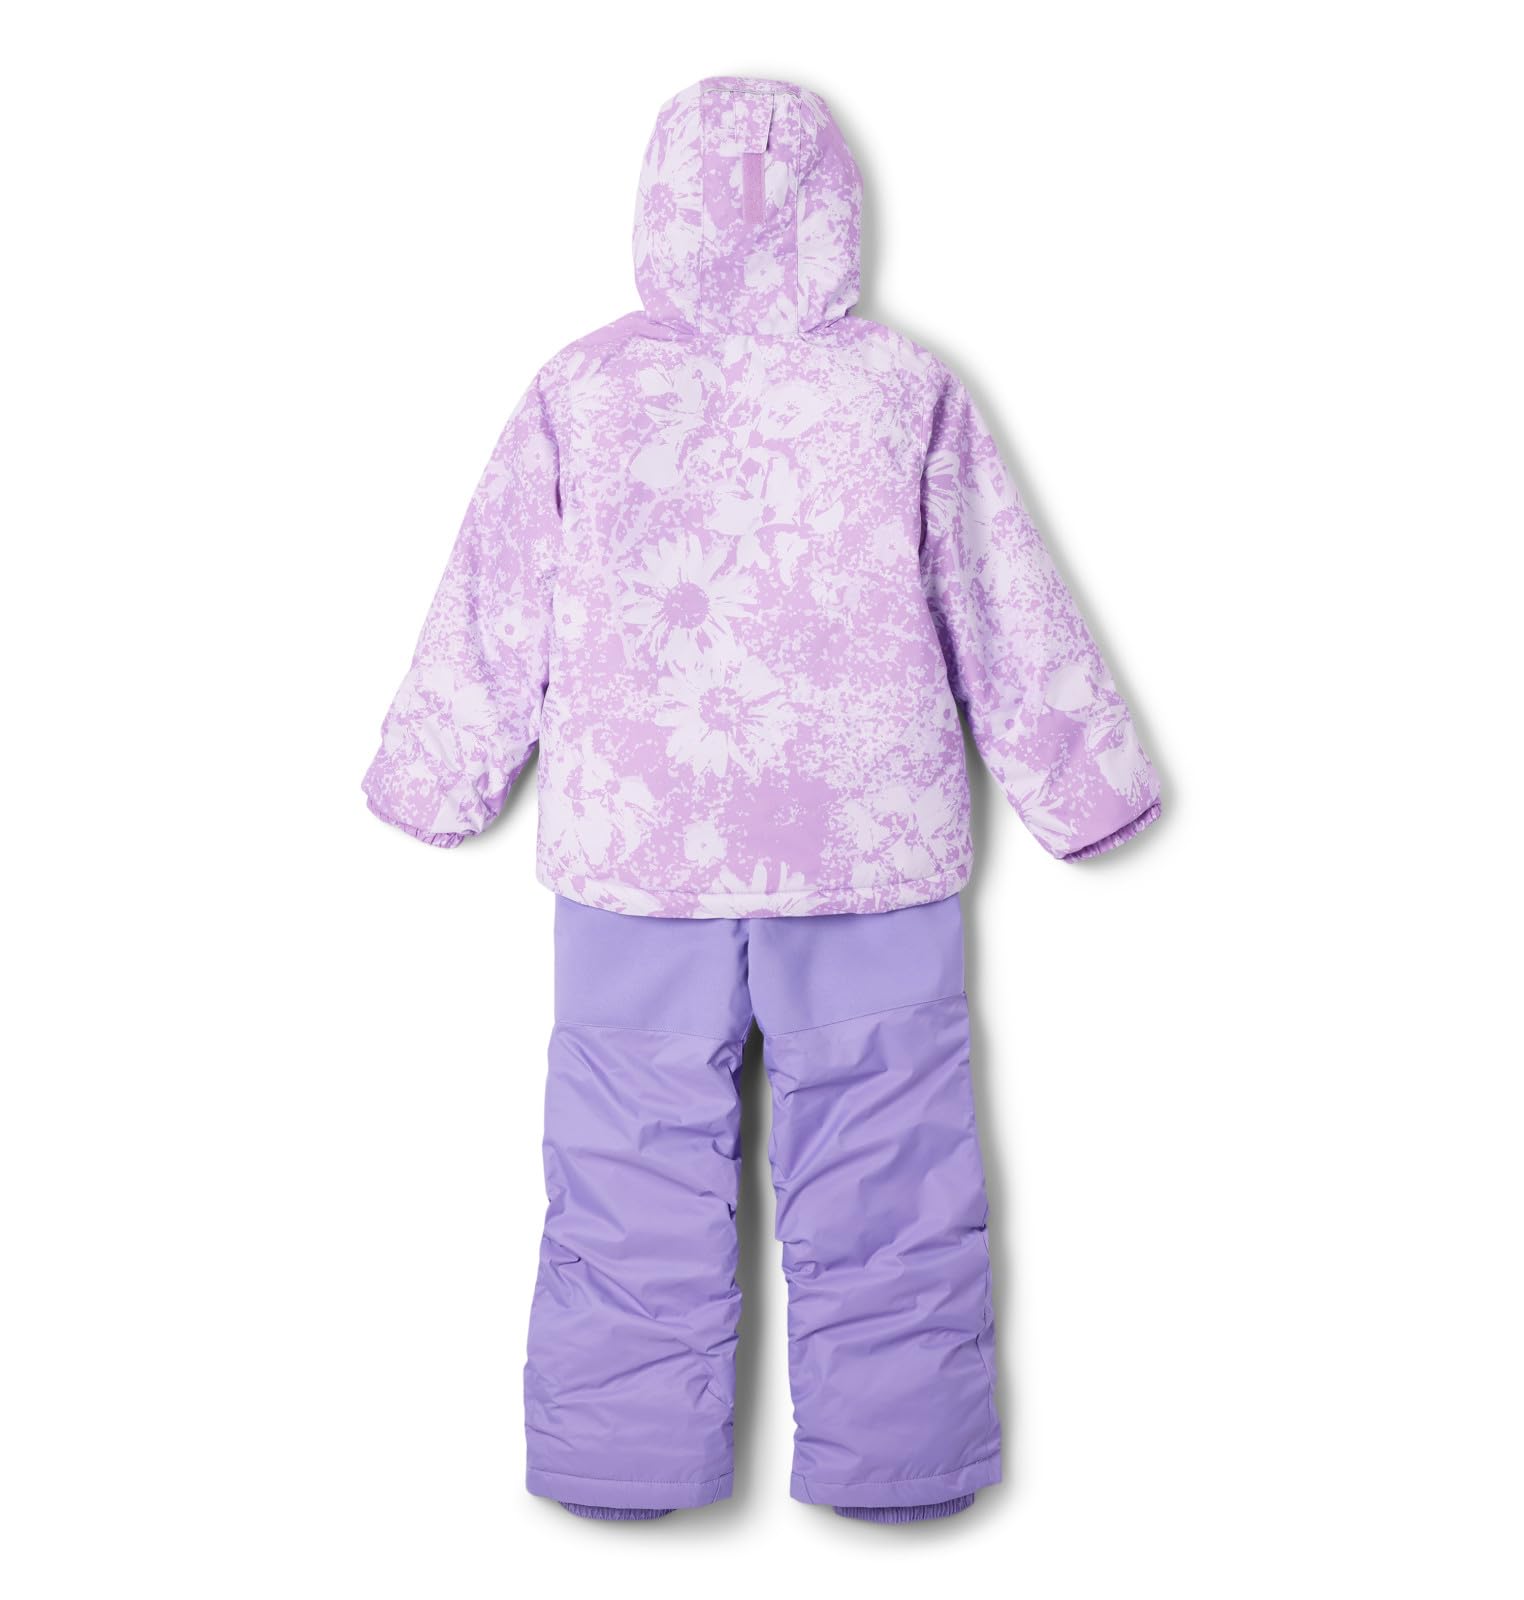 Columbia Toddler Unisex Frosty Slope Set, Gumdrop Whimsy, 2T